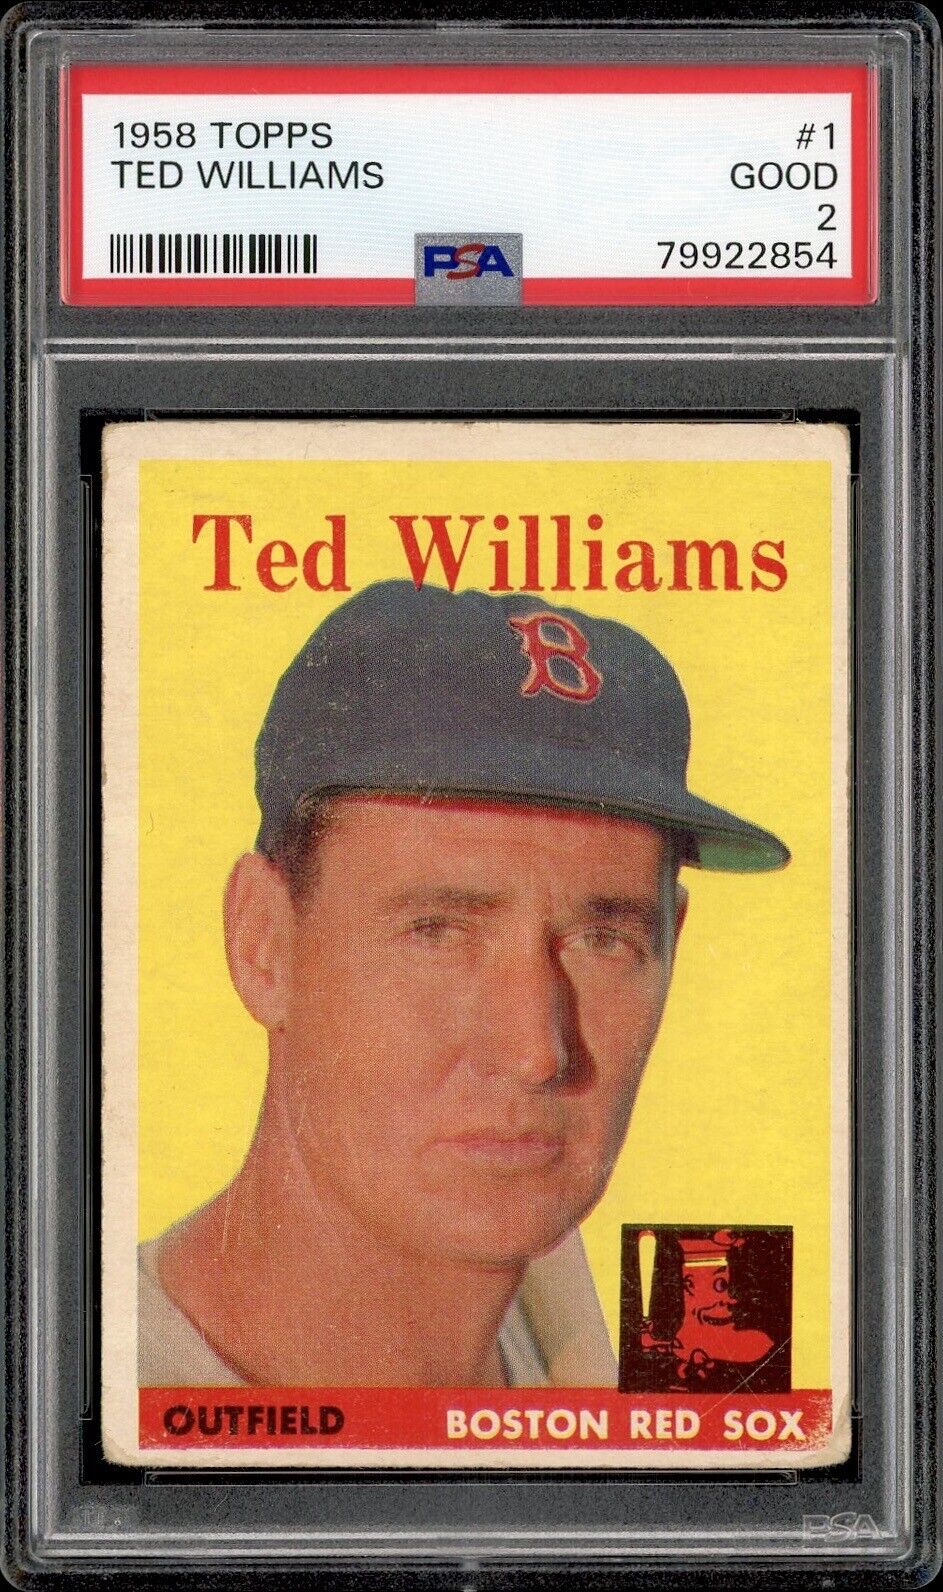 1958 Topps Ted Williams Boston Red Sox #1 PSA 2